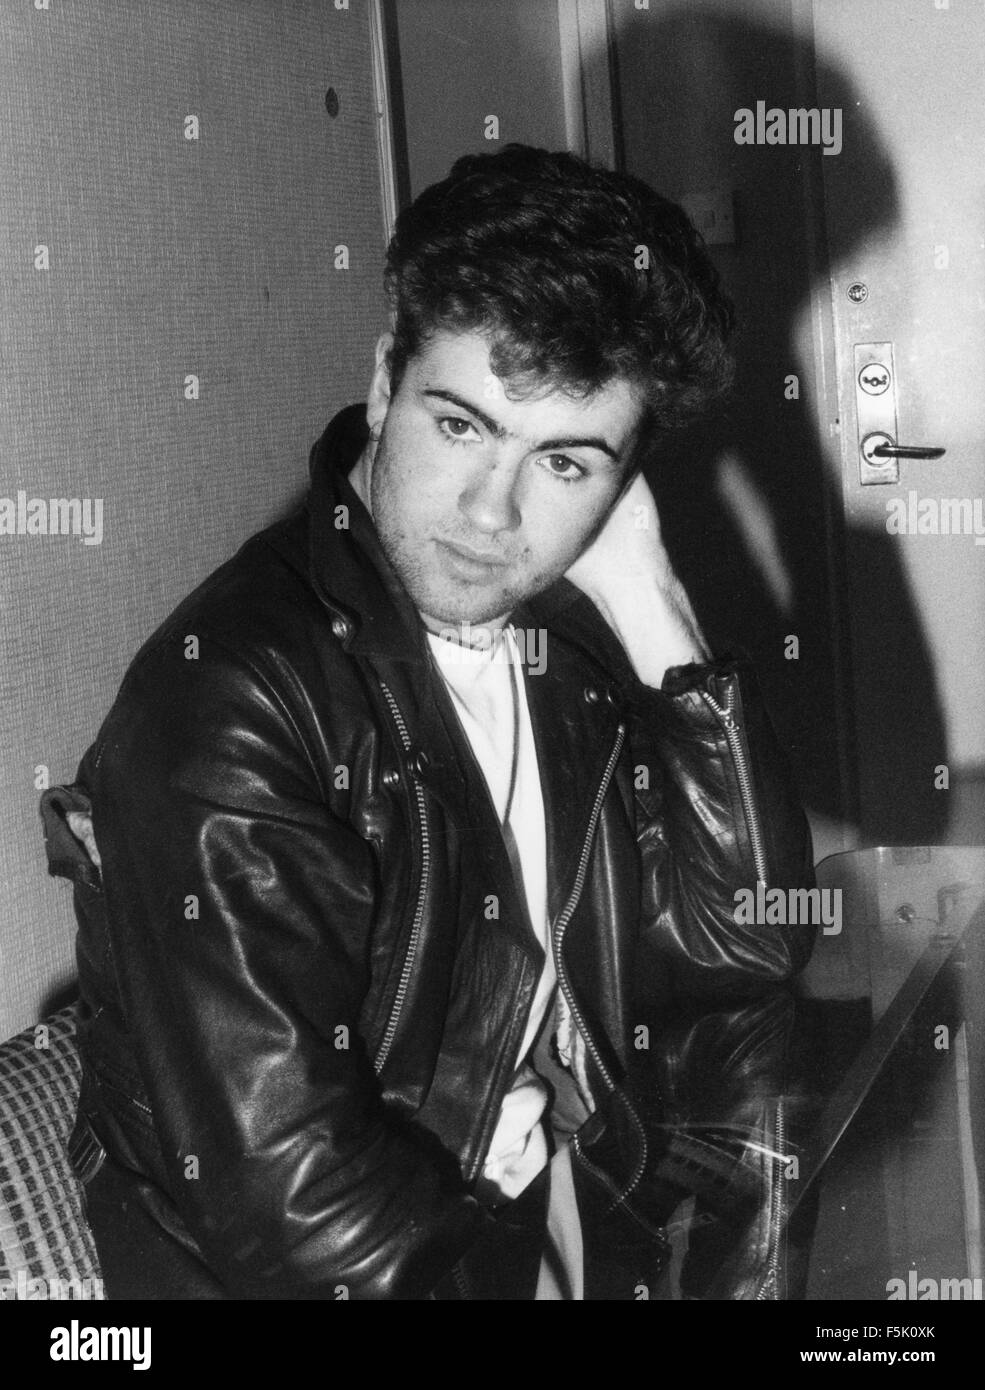 GEORGE MICHAEL UK pop musician in late 1982 at the offices of Wham"s first record company Innervision. Photo: Rudi Keuntje Stock Photo